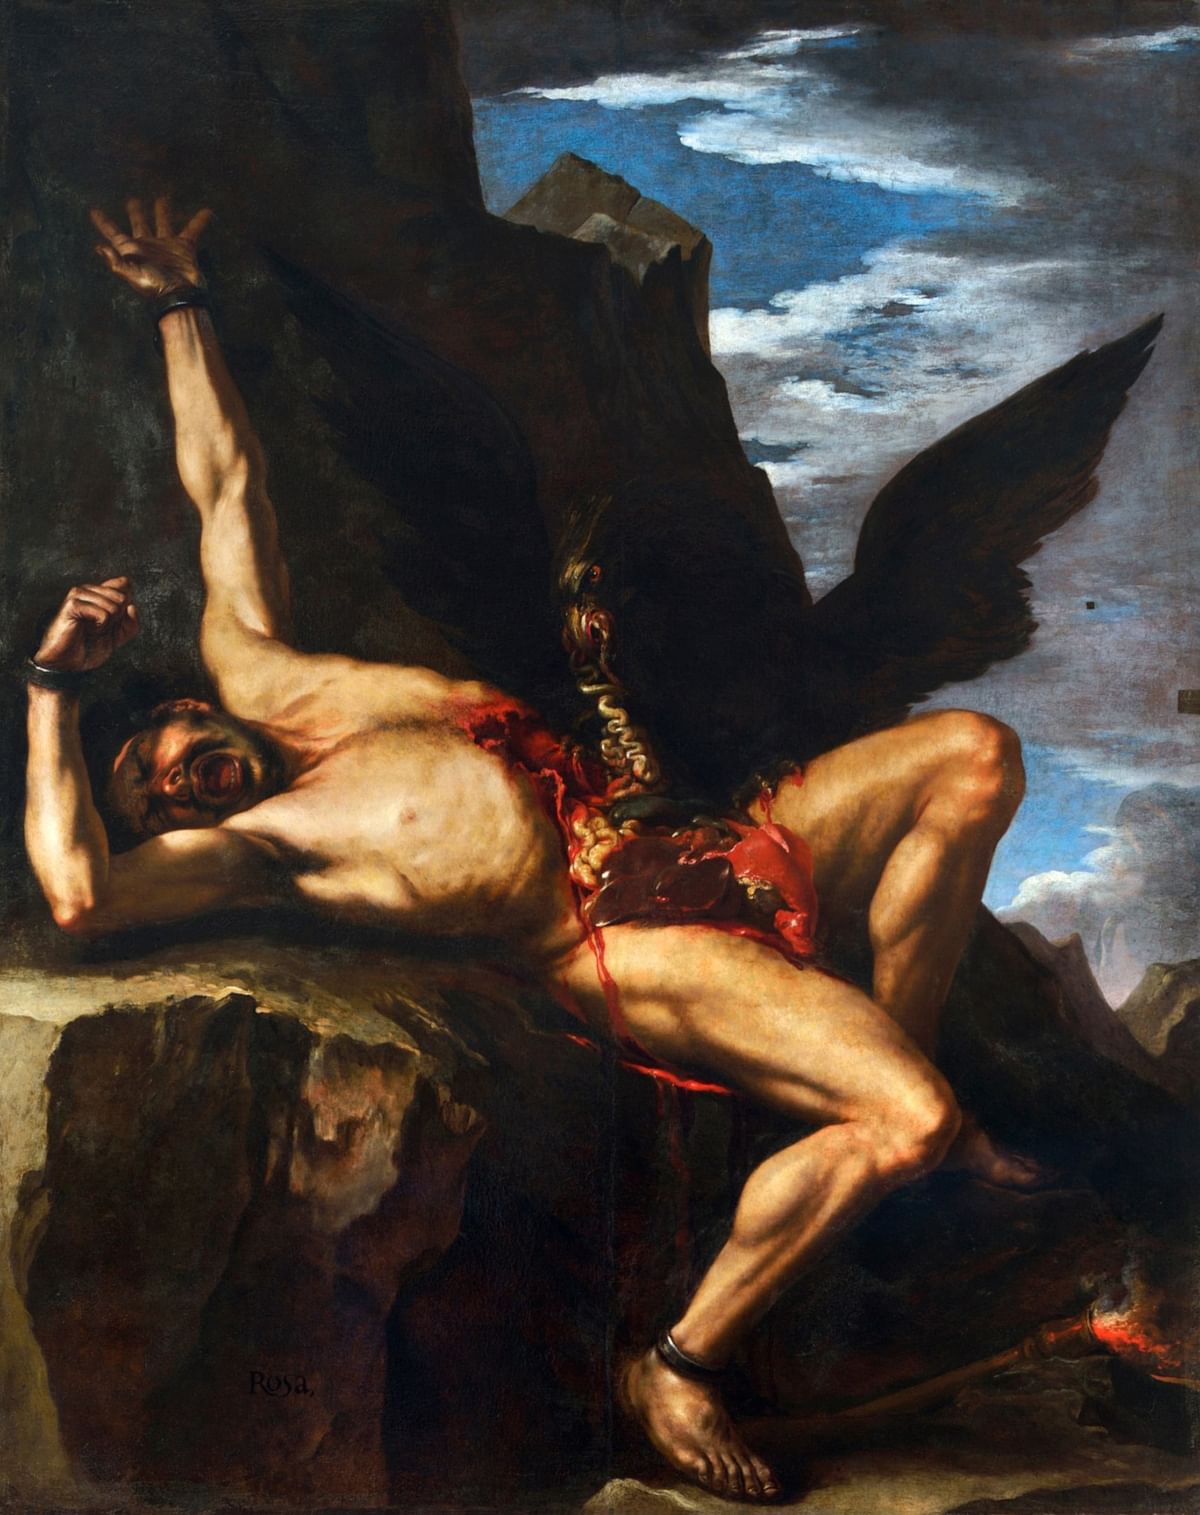 The Torture of Prometheus, painting by Salvator Rosa